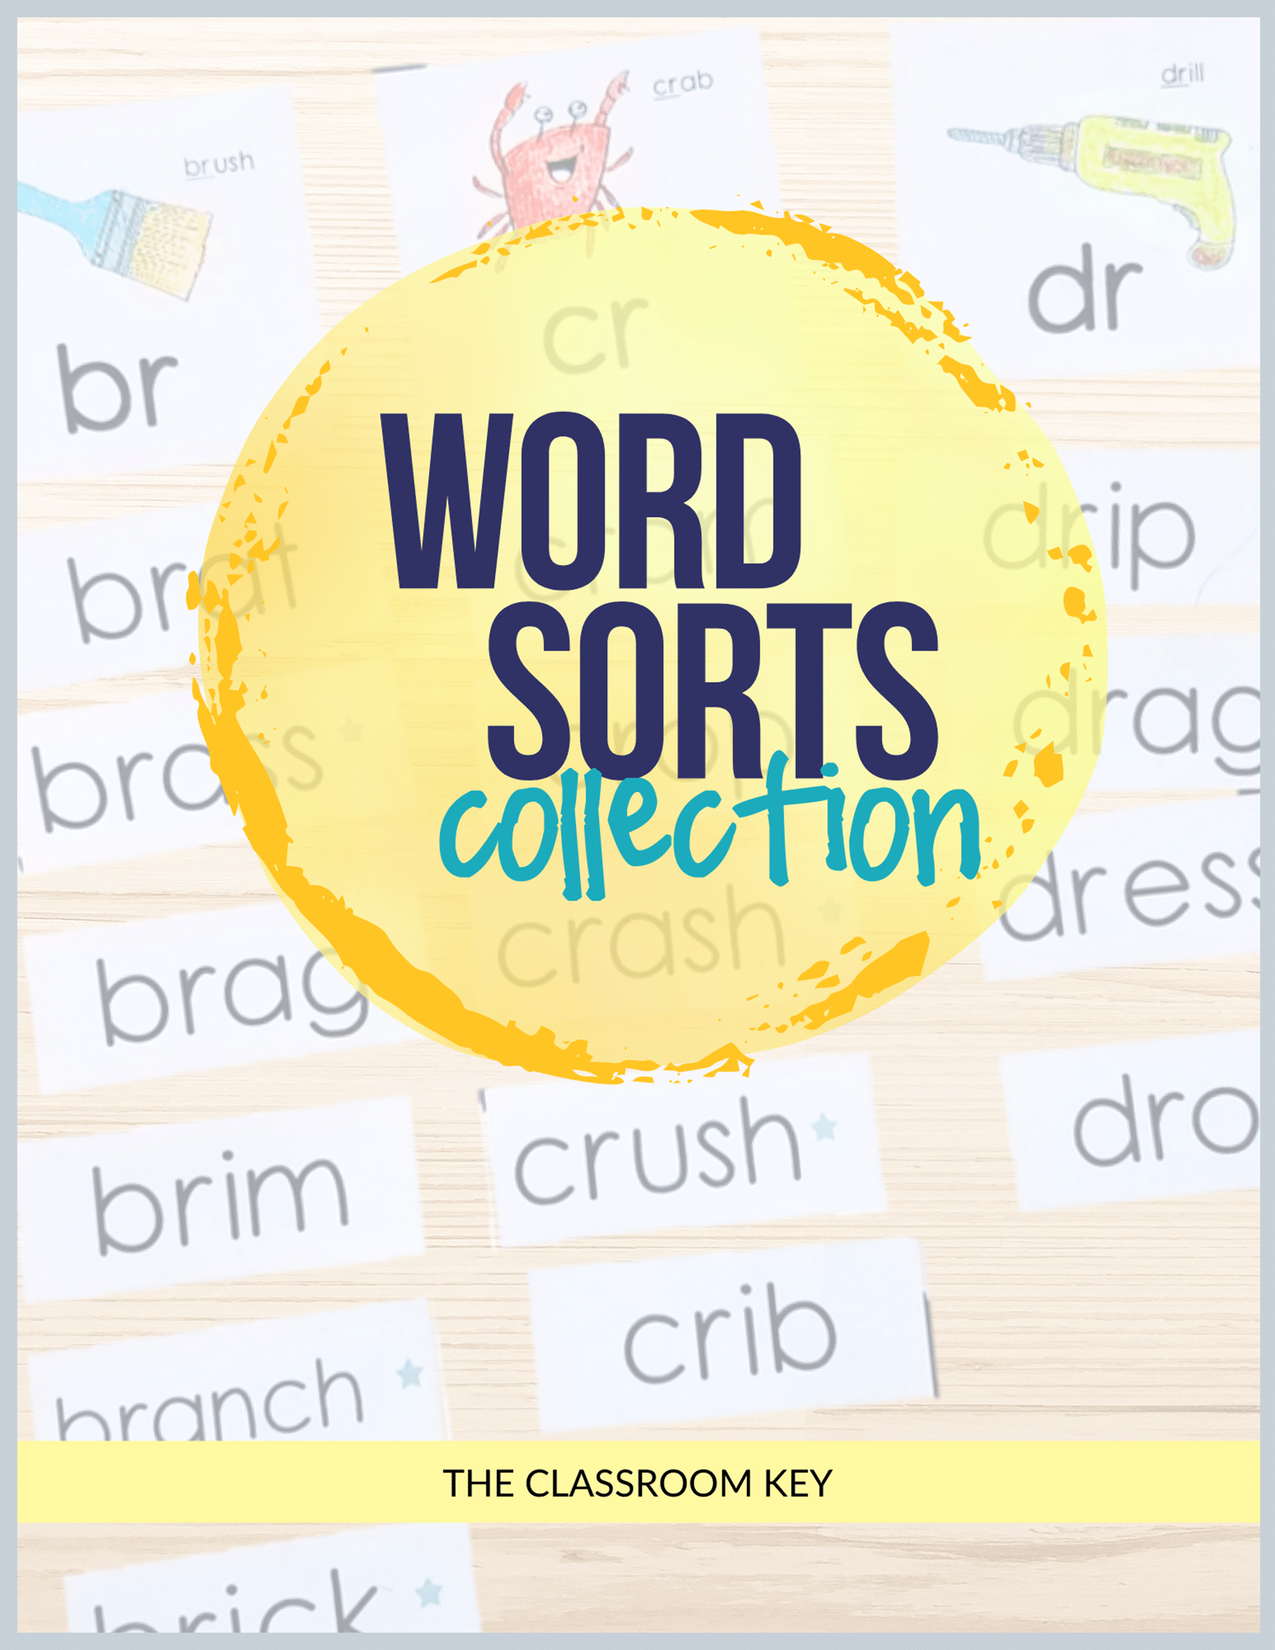 Improve reading and spelling skills with this collection of 84 words. An assessment is also included. Appropriate for 1st and 2nd grade as weekly spelling lists, a phonics activity in reading groups or as a literacy center